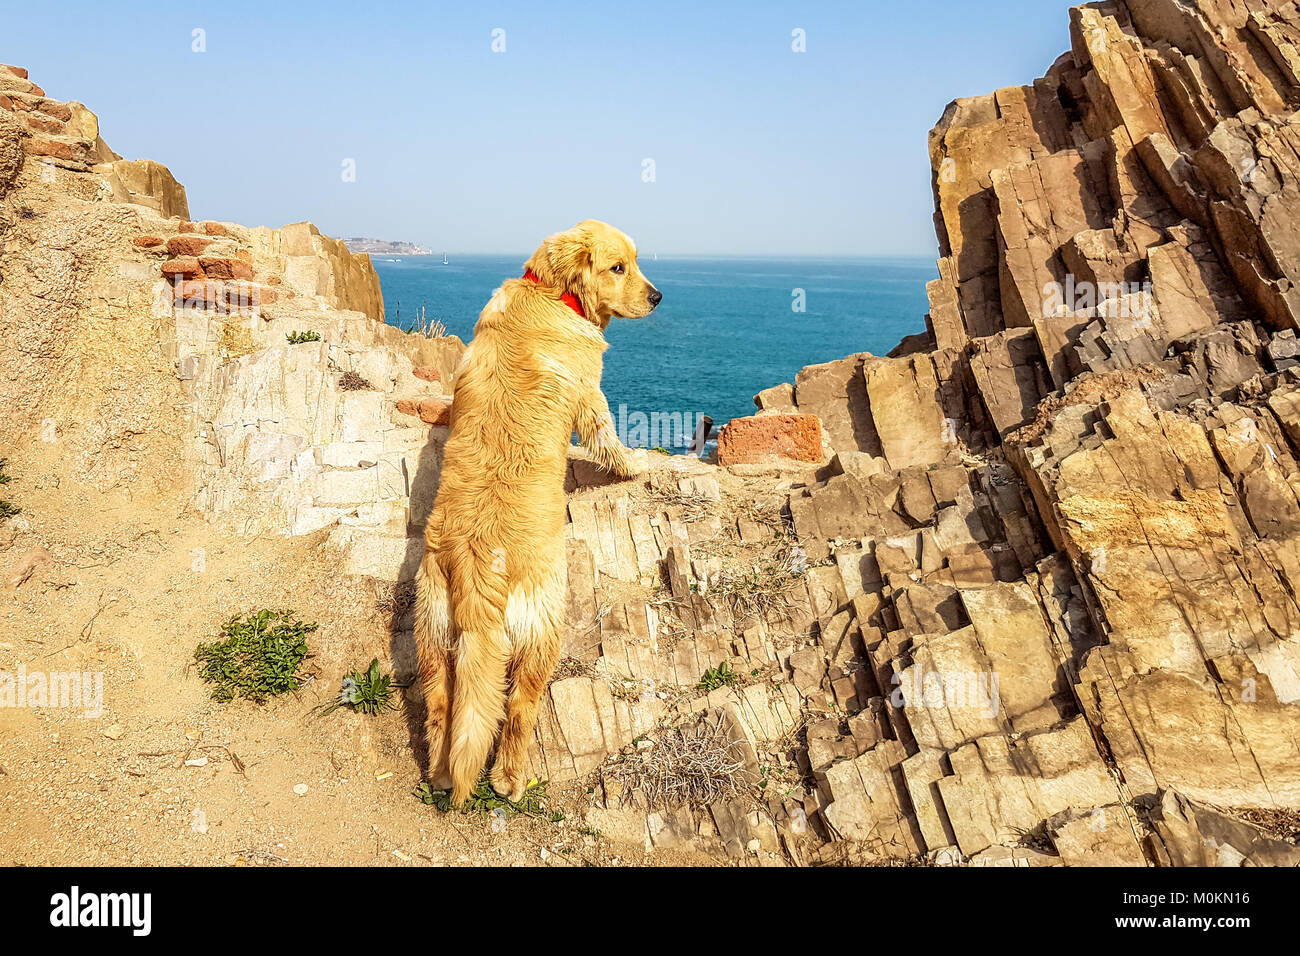 Golden retriever looking at the sea from the rocks of Qingdao coastline, Shandong province, China Stock Photo